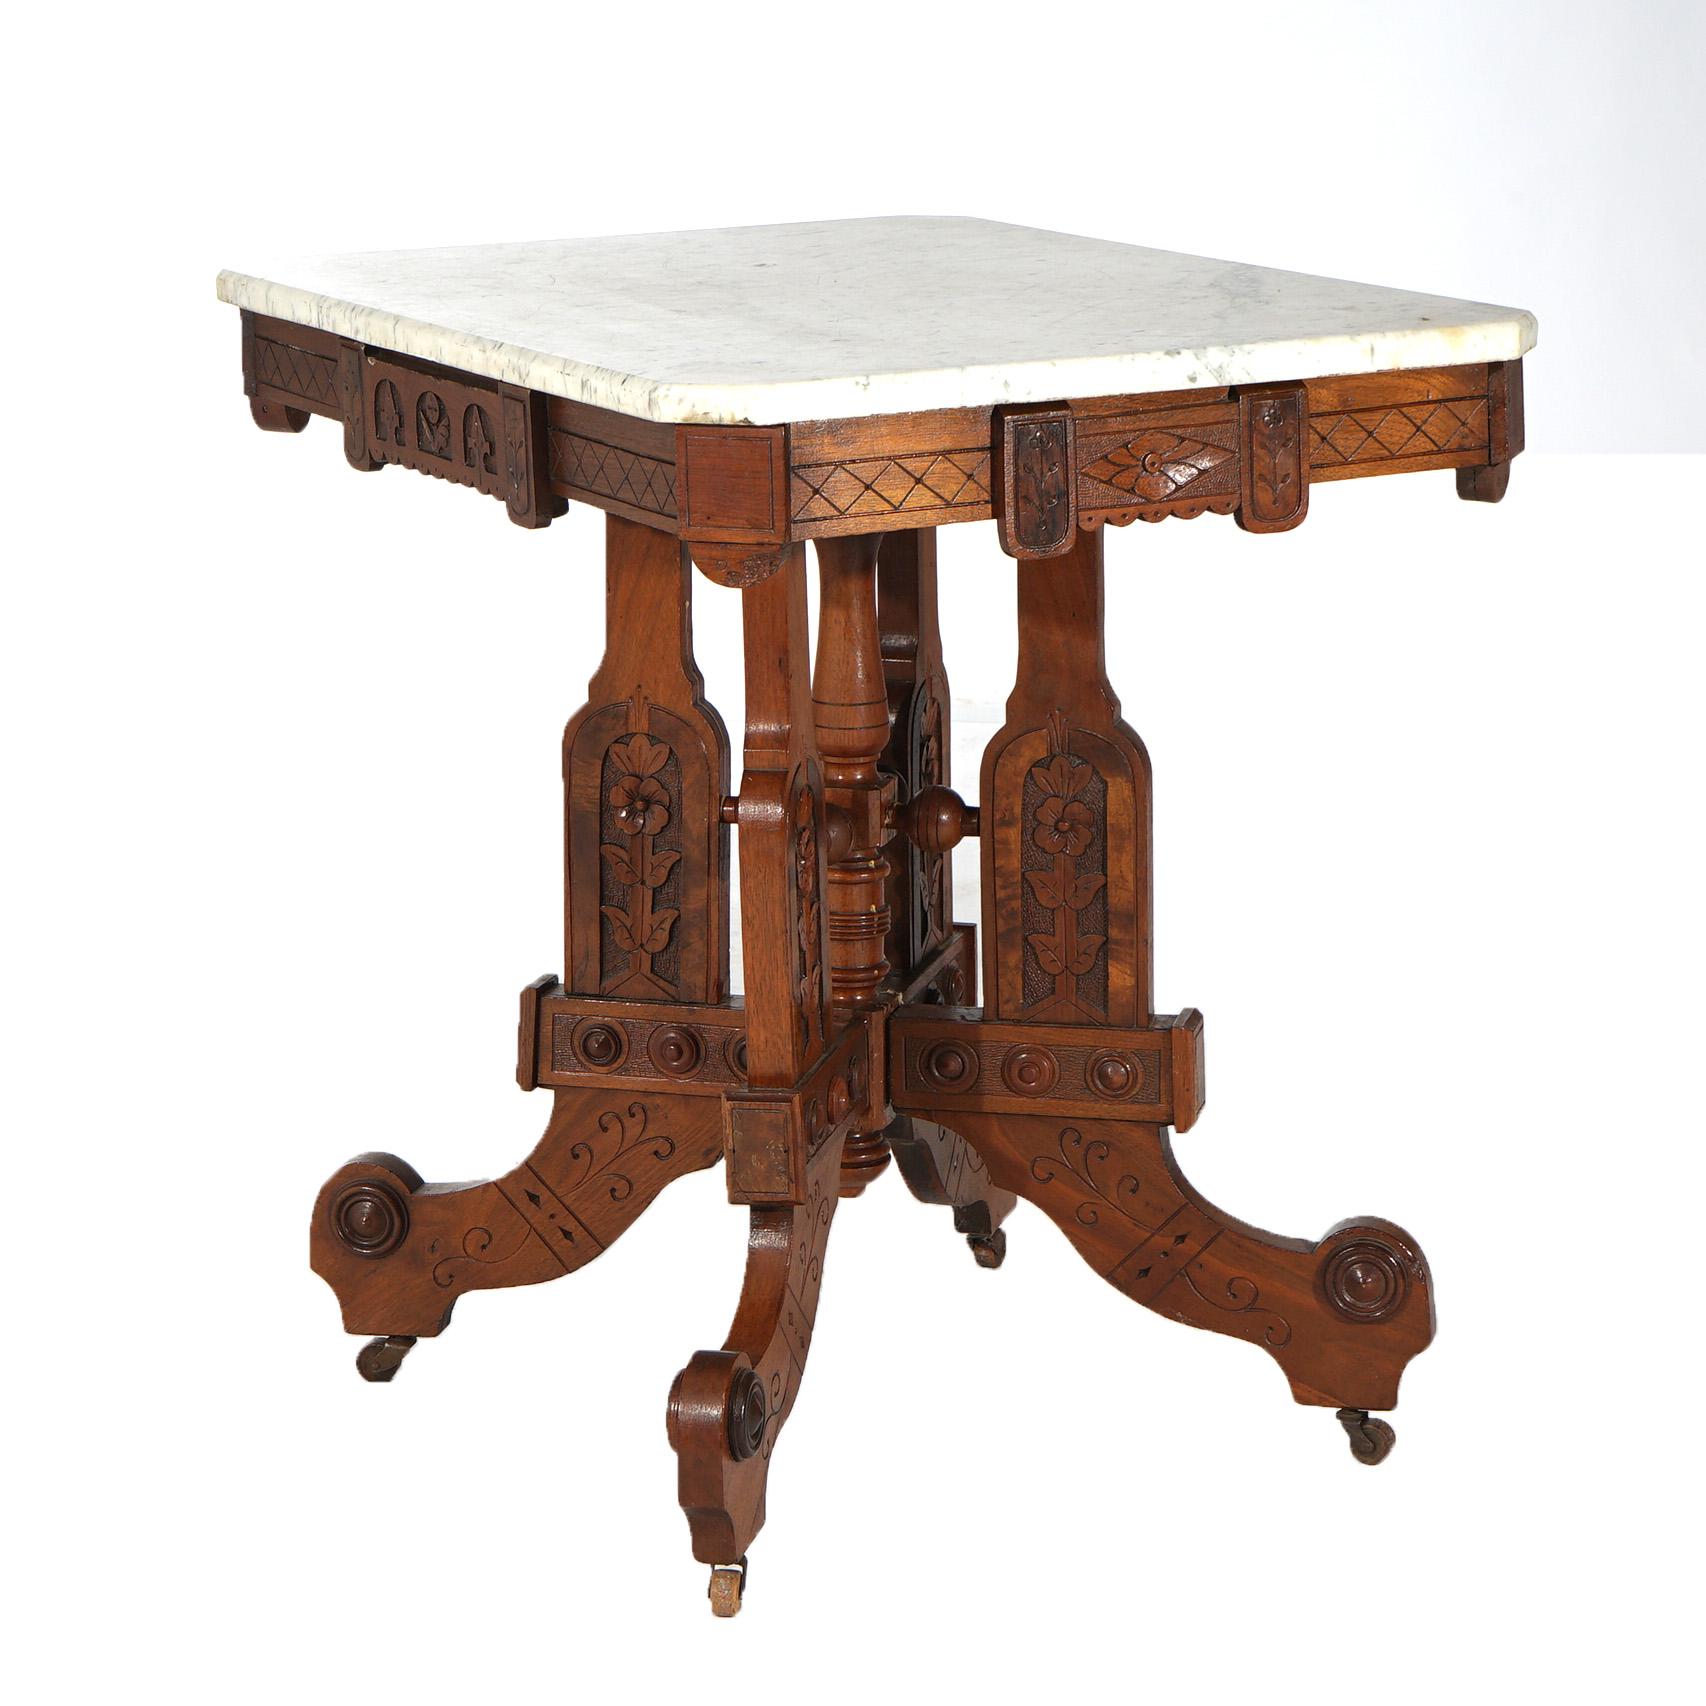 Antique Eastlake Aesthetic Floral Carved Walnut & Marble Parlor Table, c1880 For Sale 5